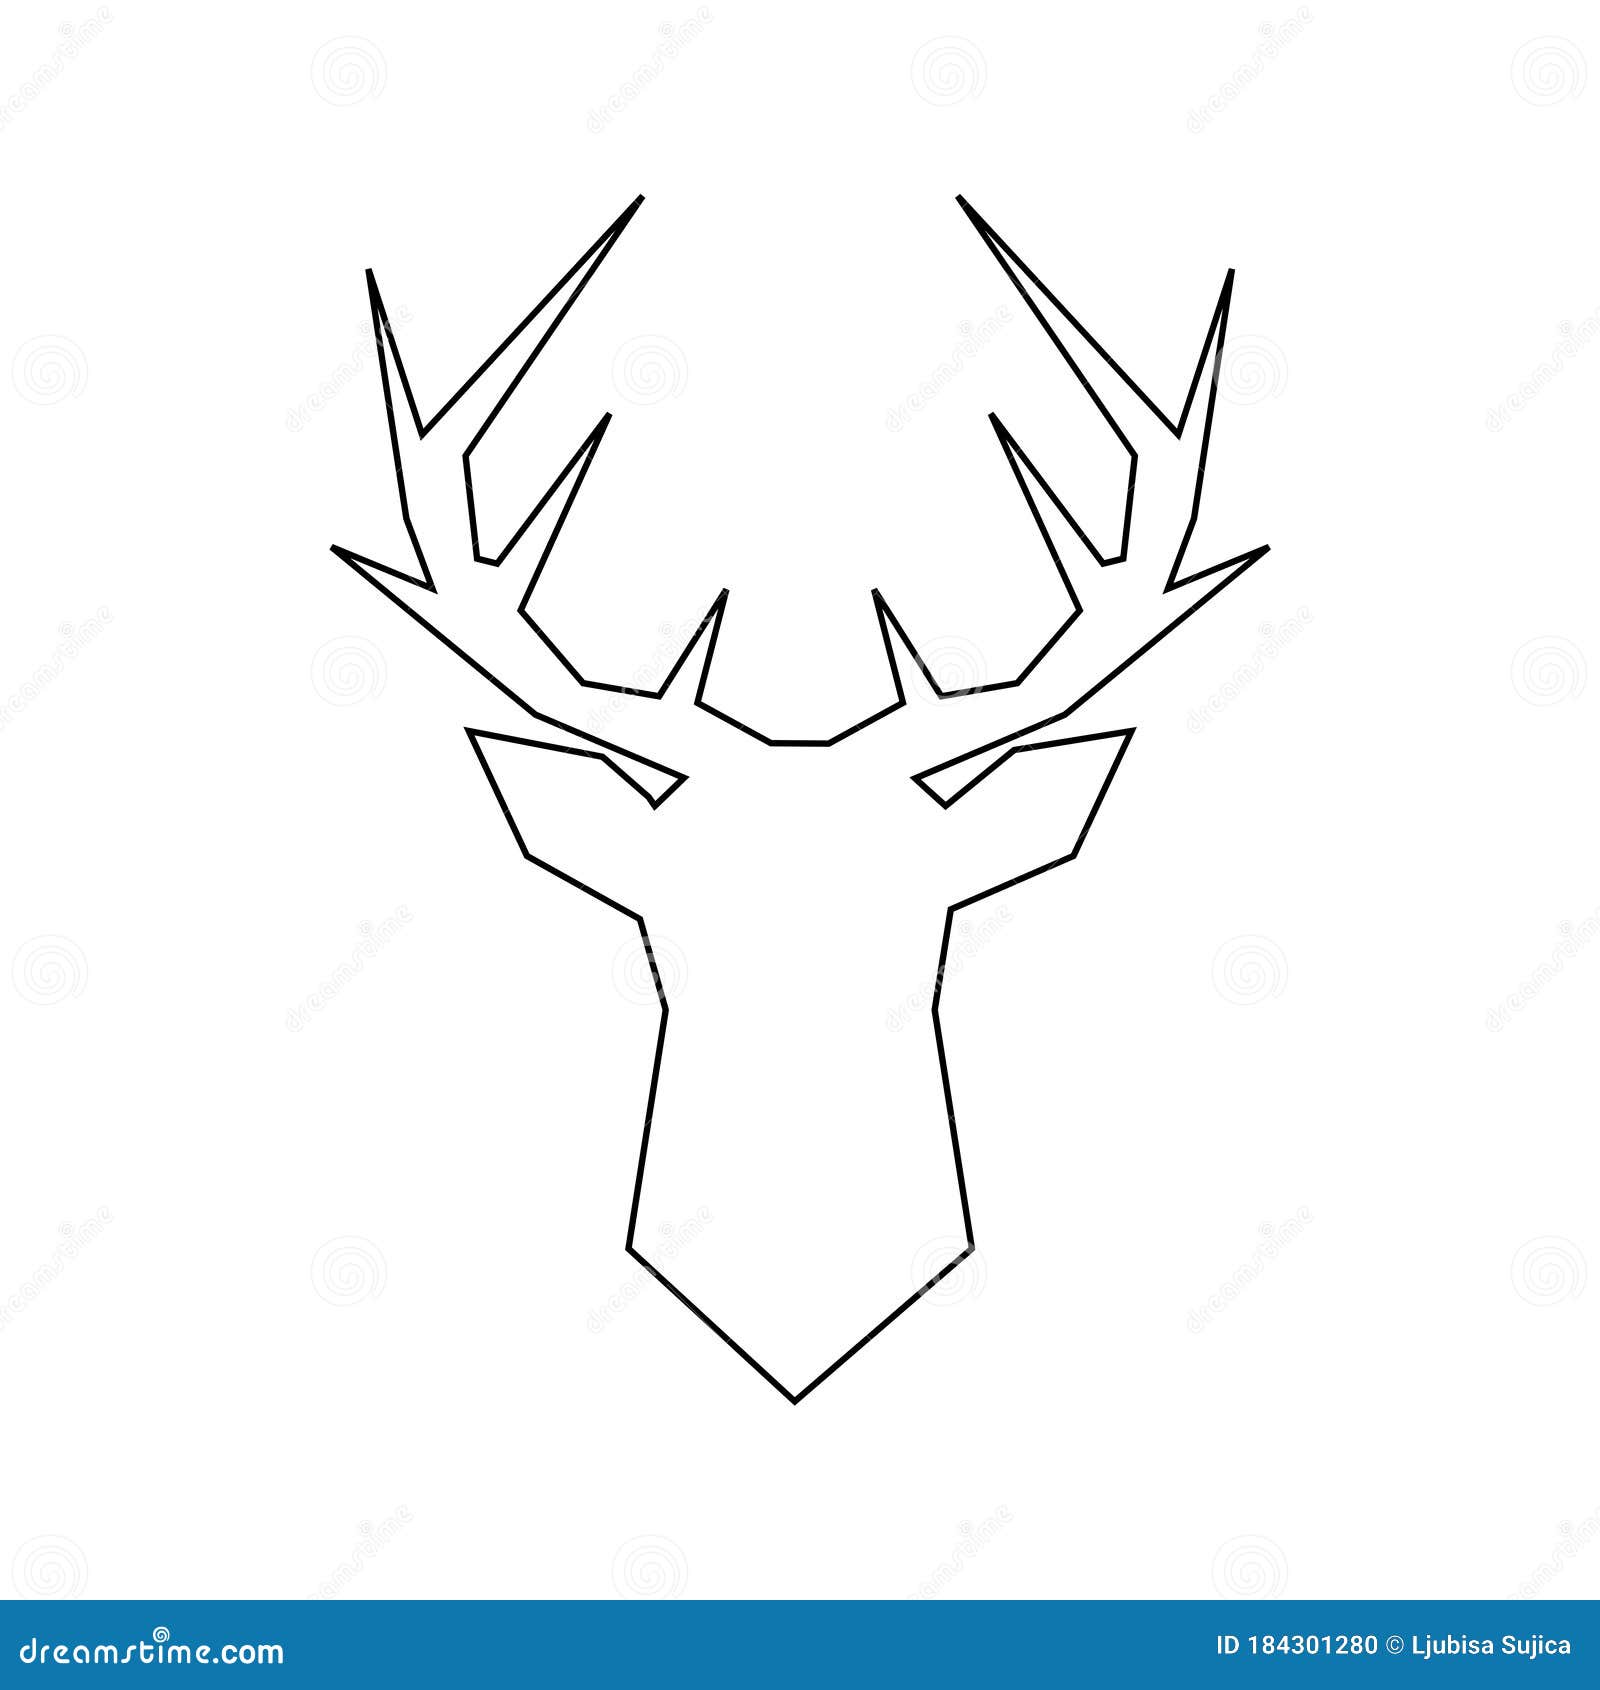 Hand drawn deer horns isolated on white background